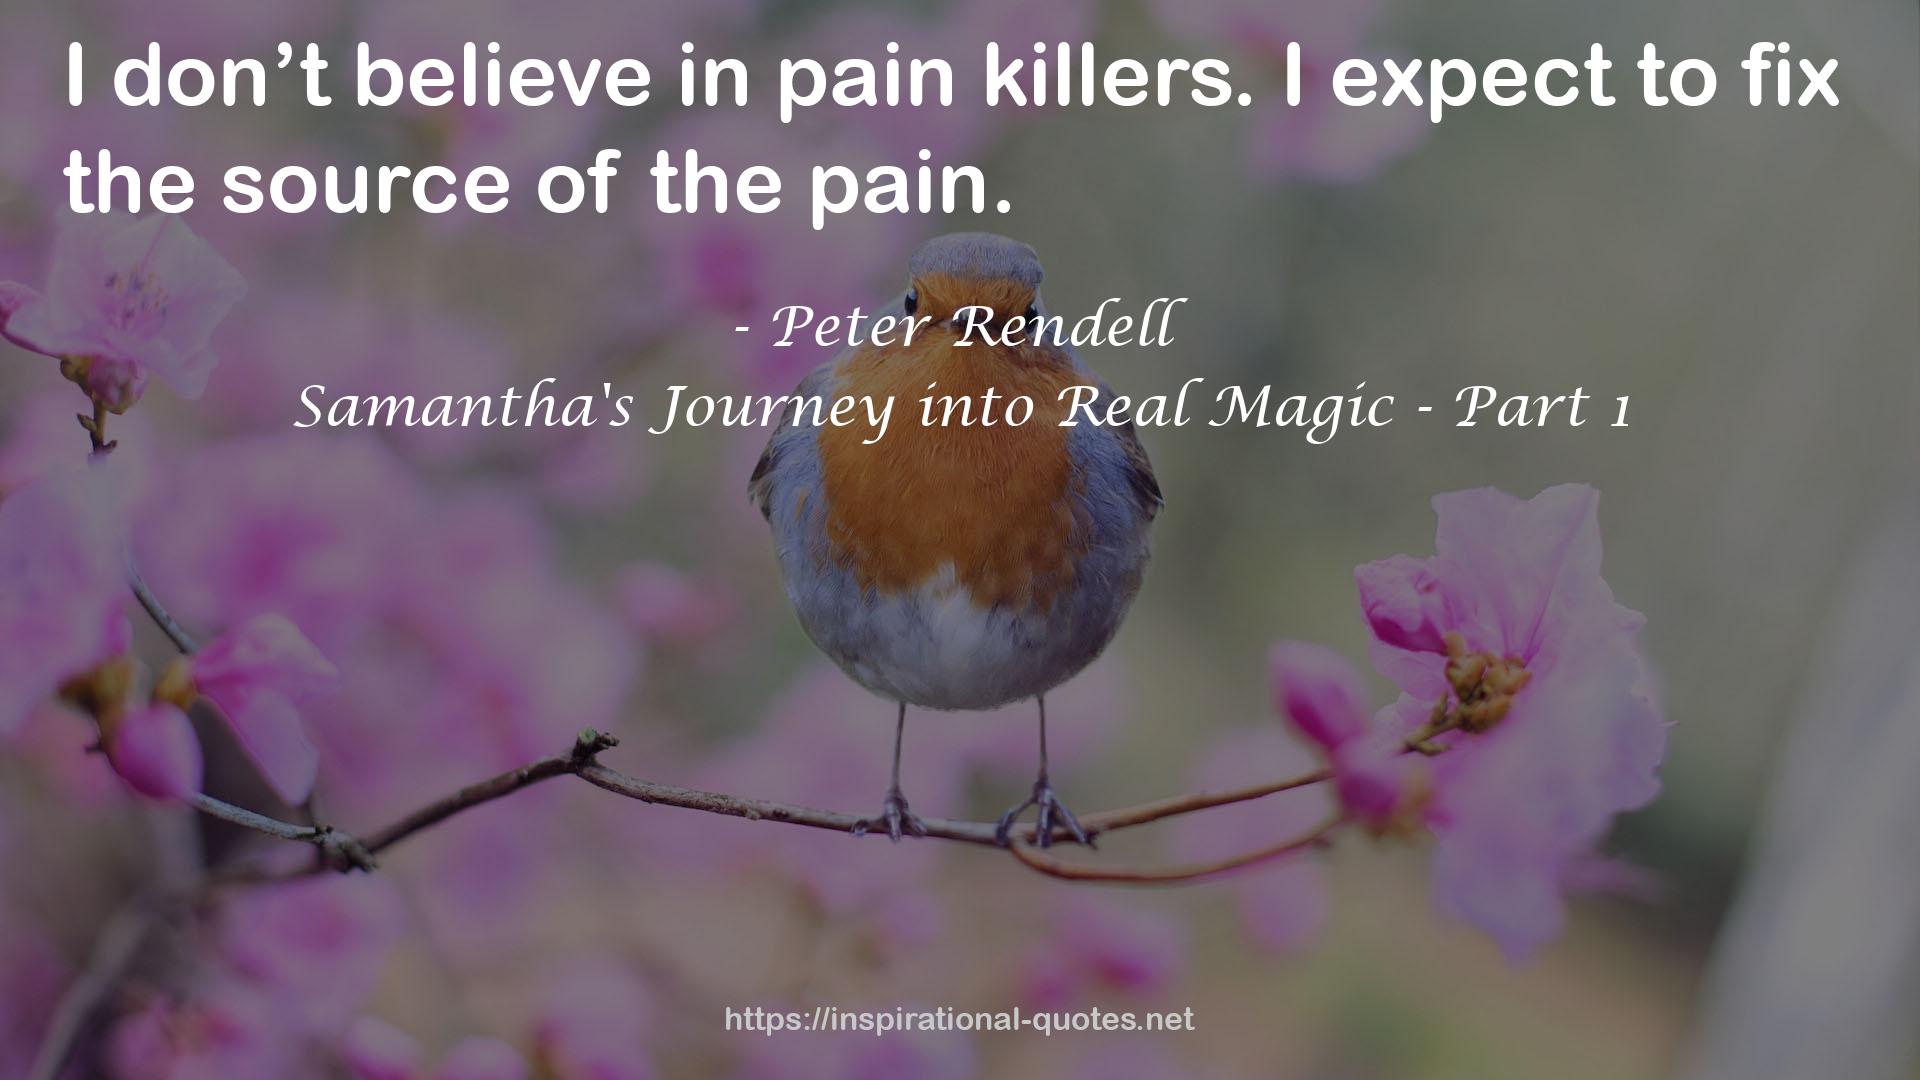 Samantha's Journey into Real Magic - Part 1 QUOTES